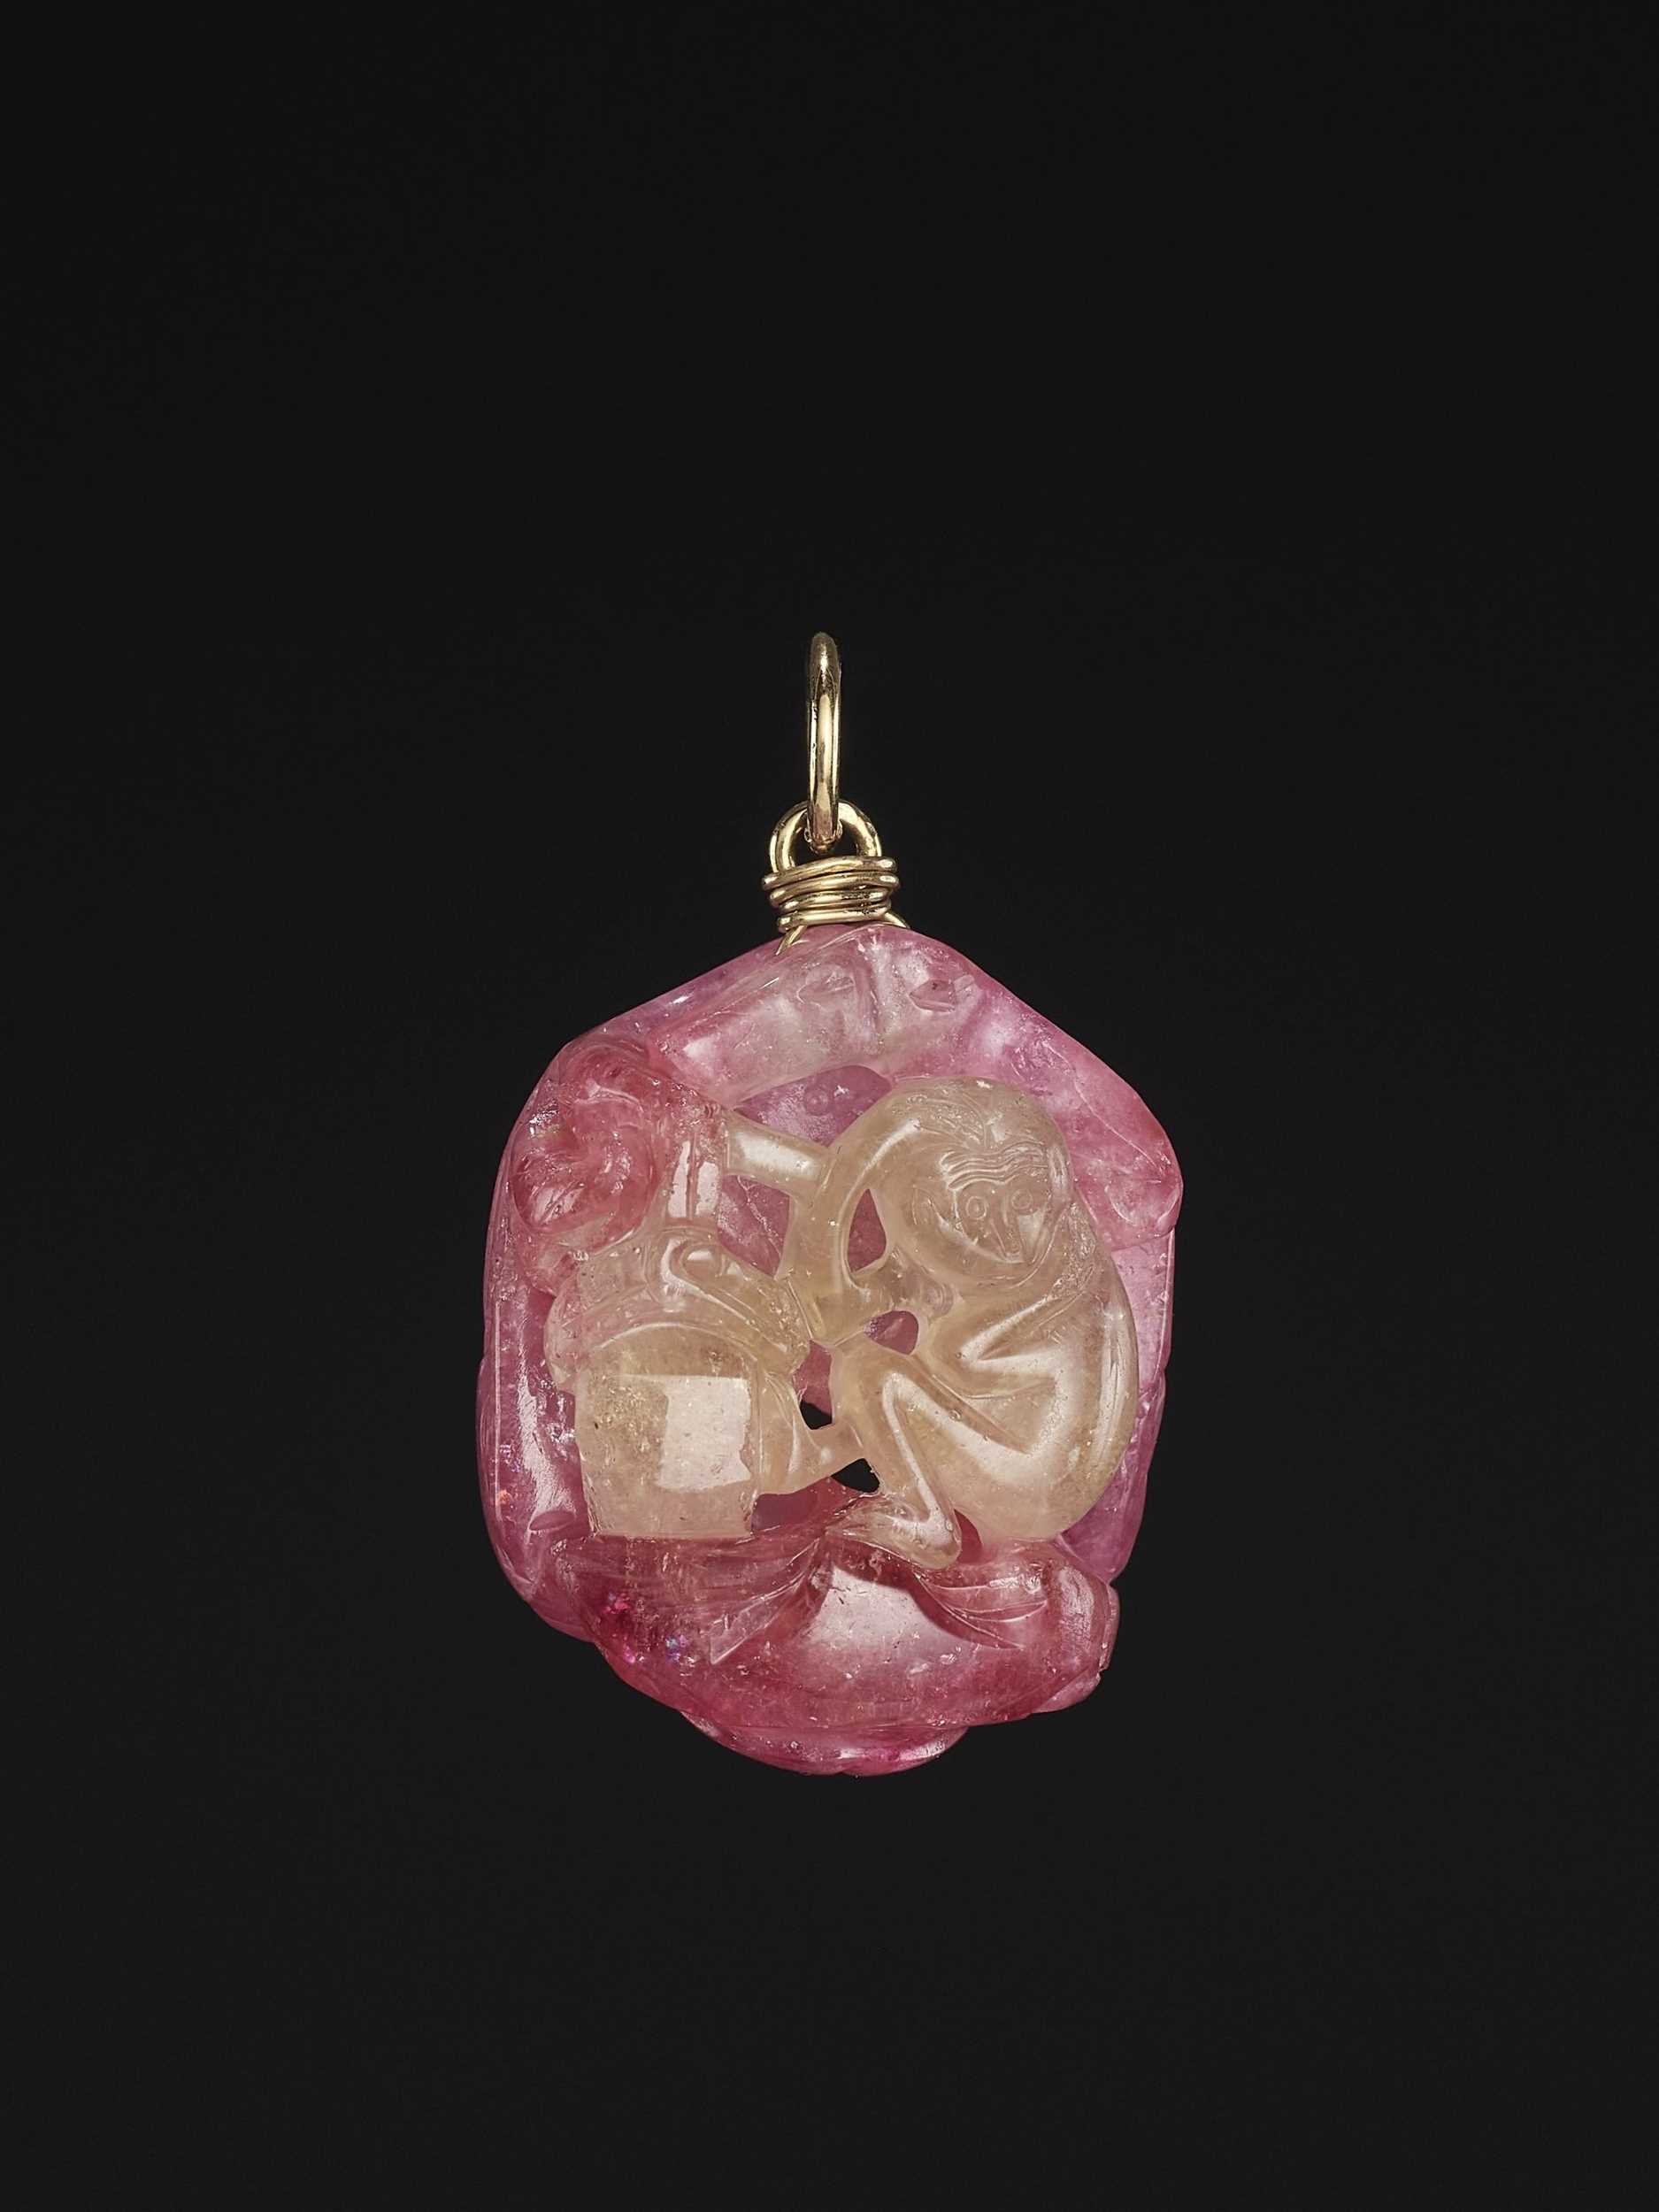 Lot 39 - A PINK AND GREEN TOURMALINE ‘PENSIVE MONKEY’ PENDANT, LATE QING DYNASTY